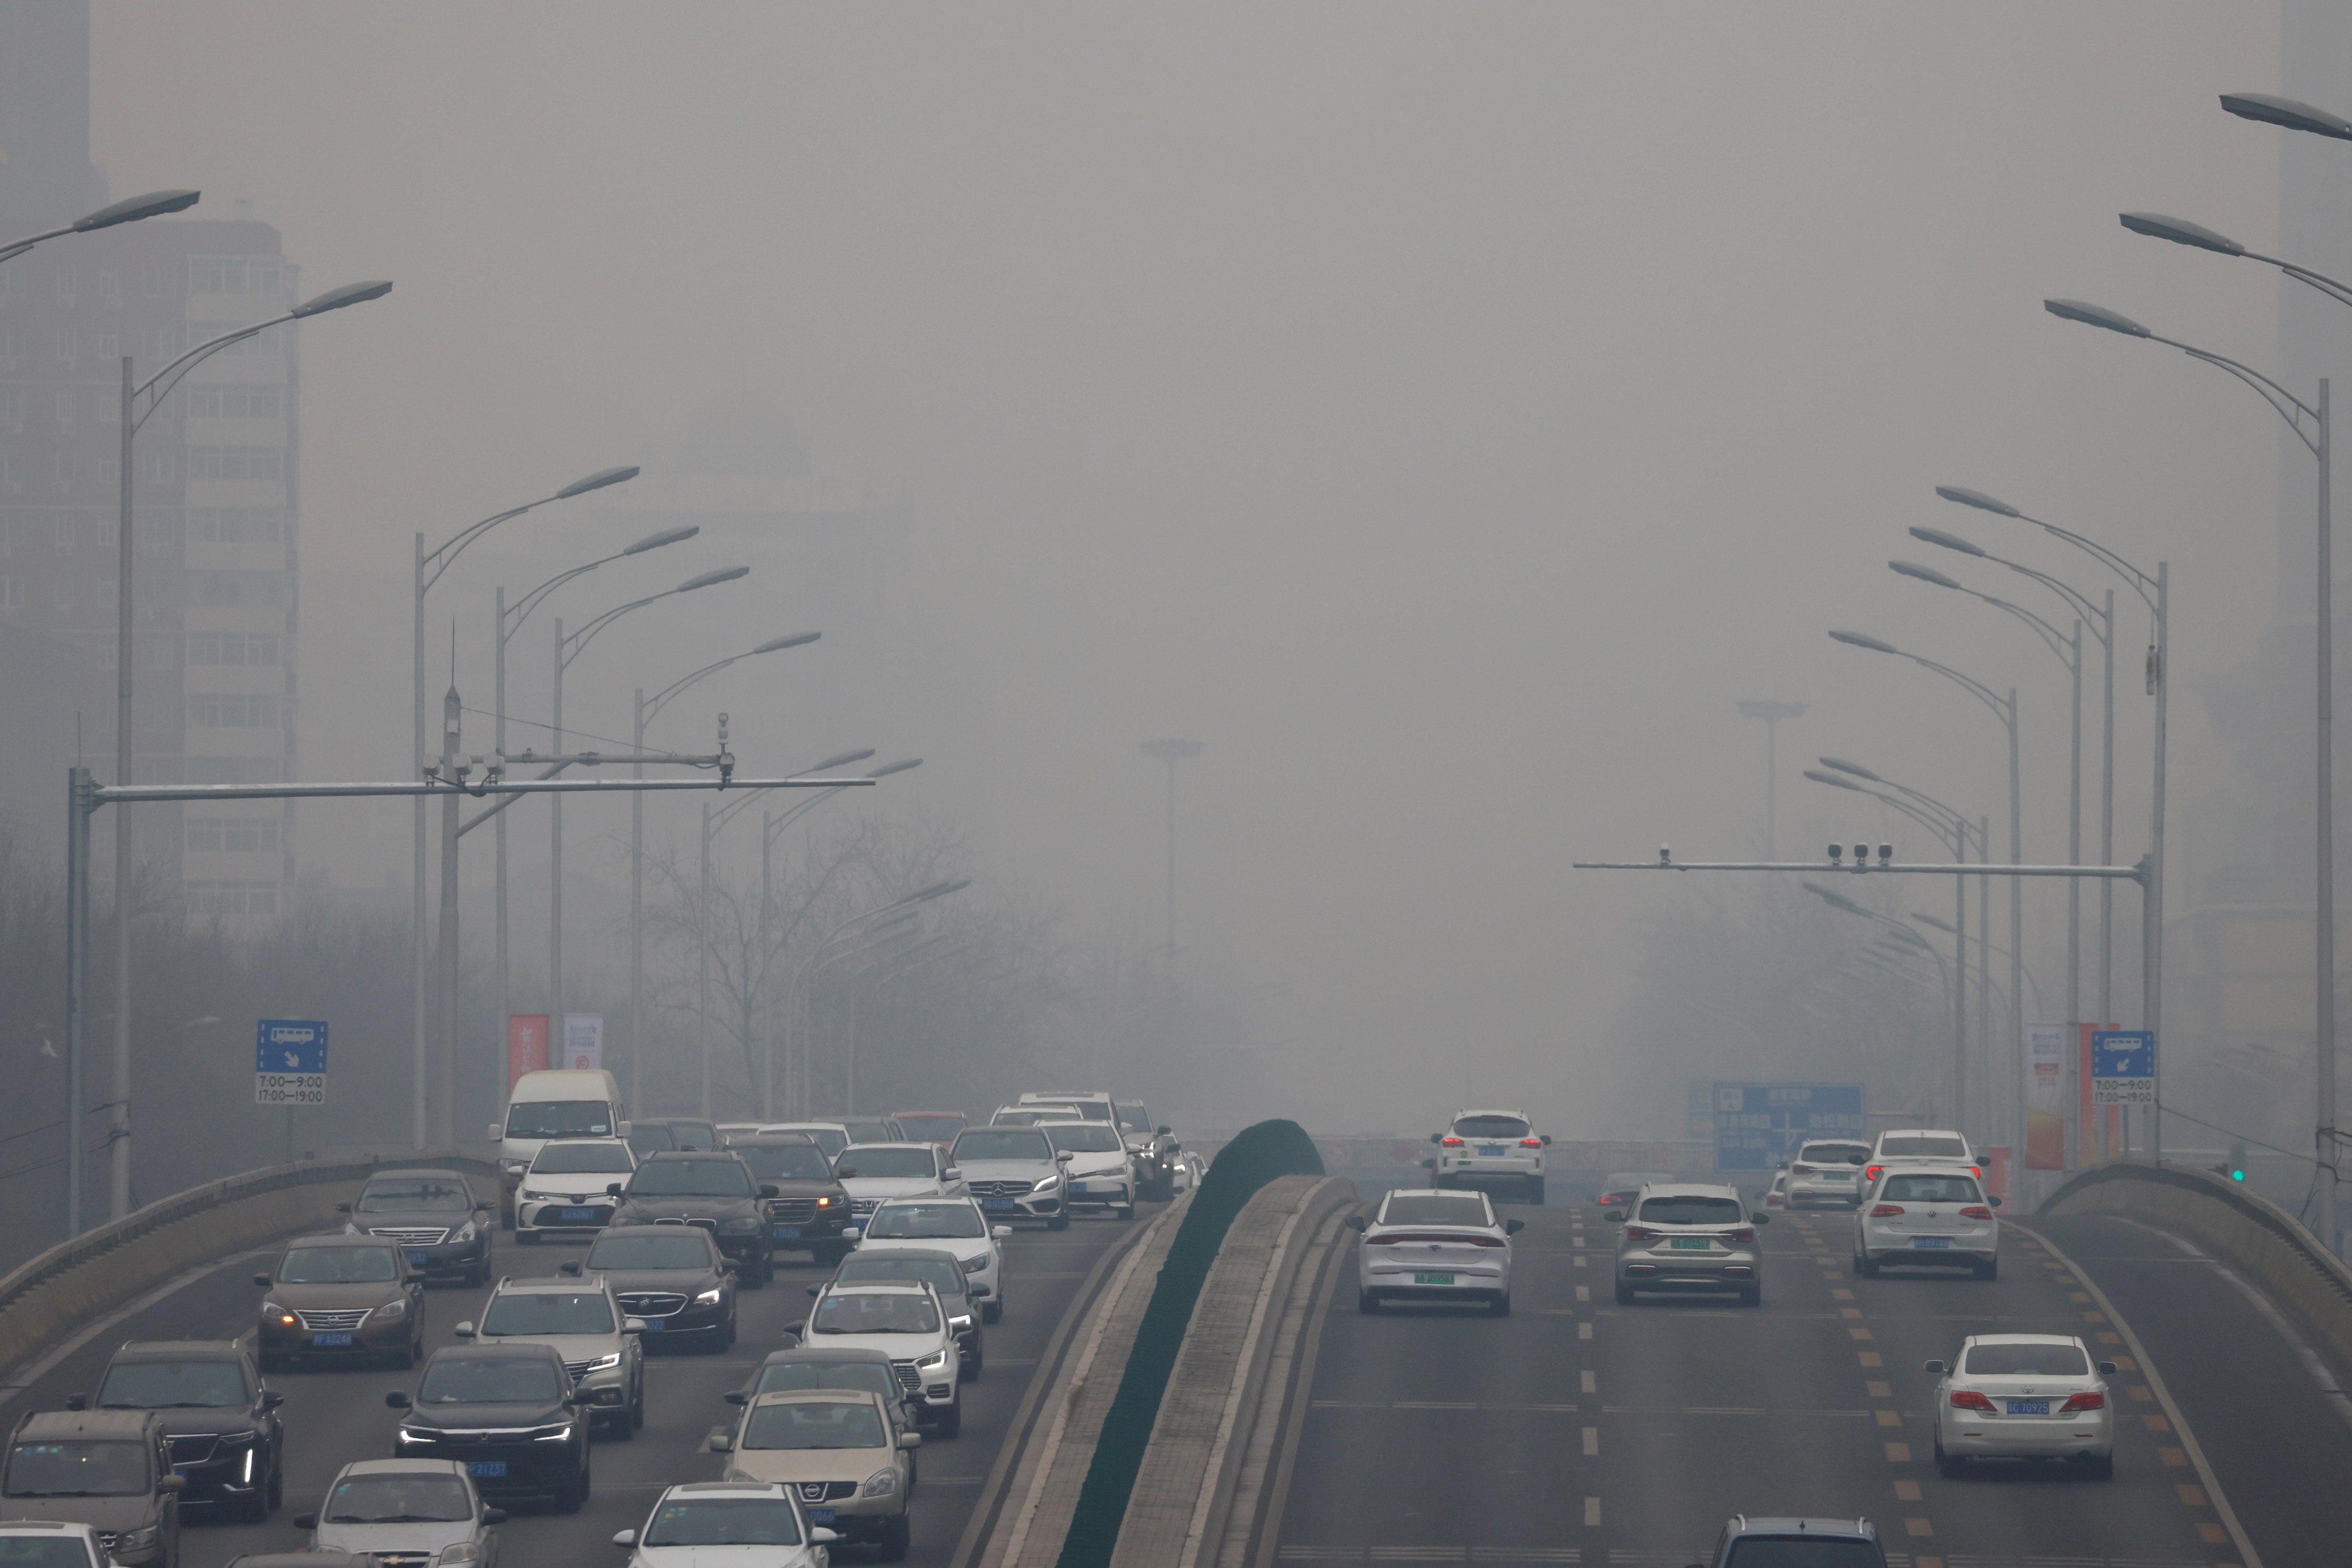 Cars move on a road during a day with polluted air, following the outbreak of the coronavirus disease (COVID-19), in Beijing, China February 13, 2021